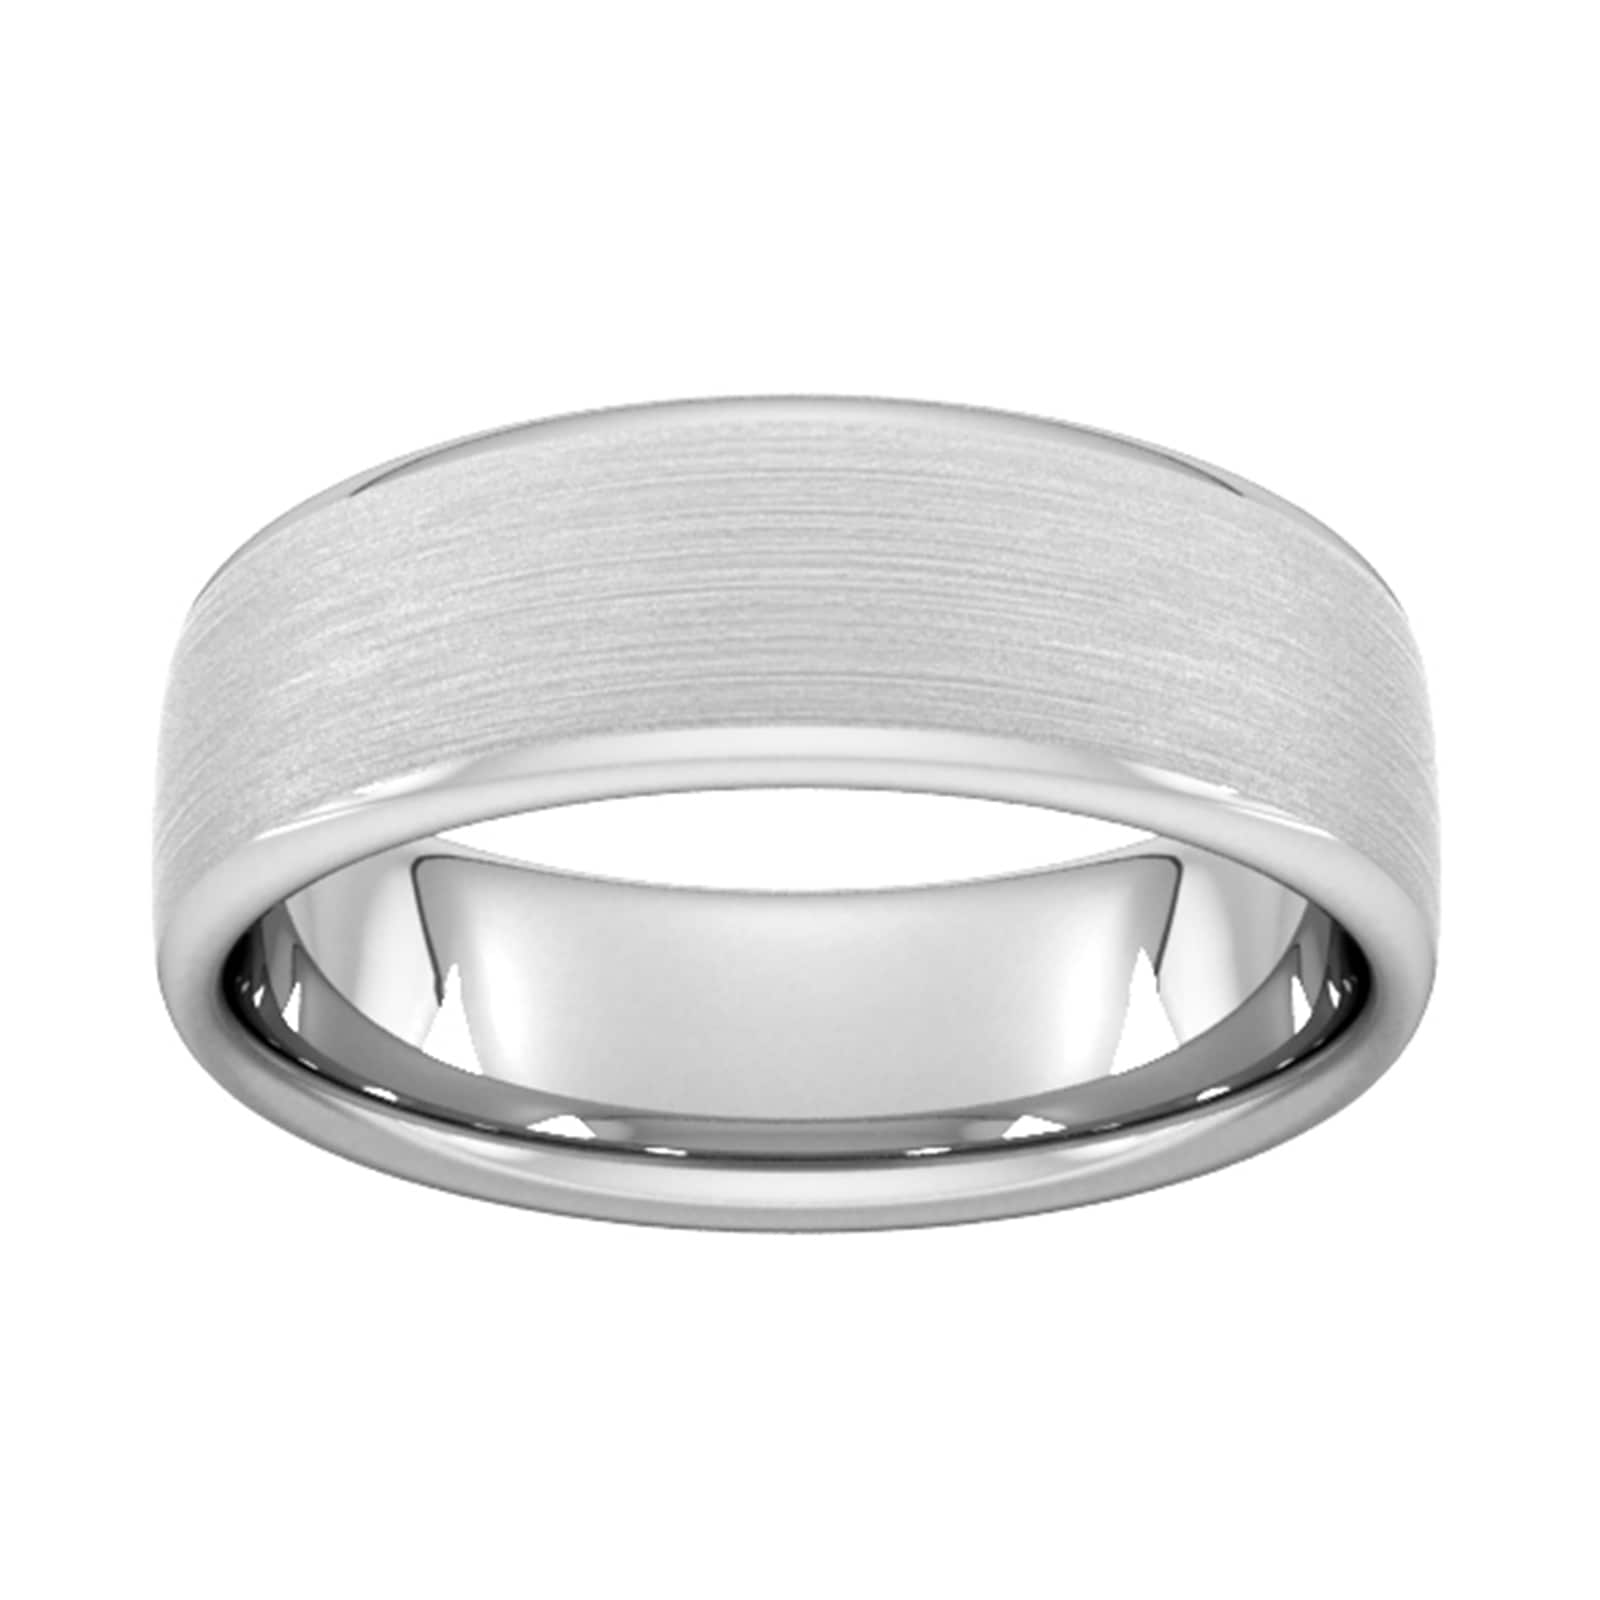 7mm Flat Court Heavy Matt Finished Wedding Ring In 9 Carat White Gold - Ring Size R